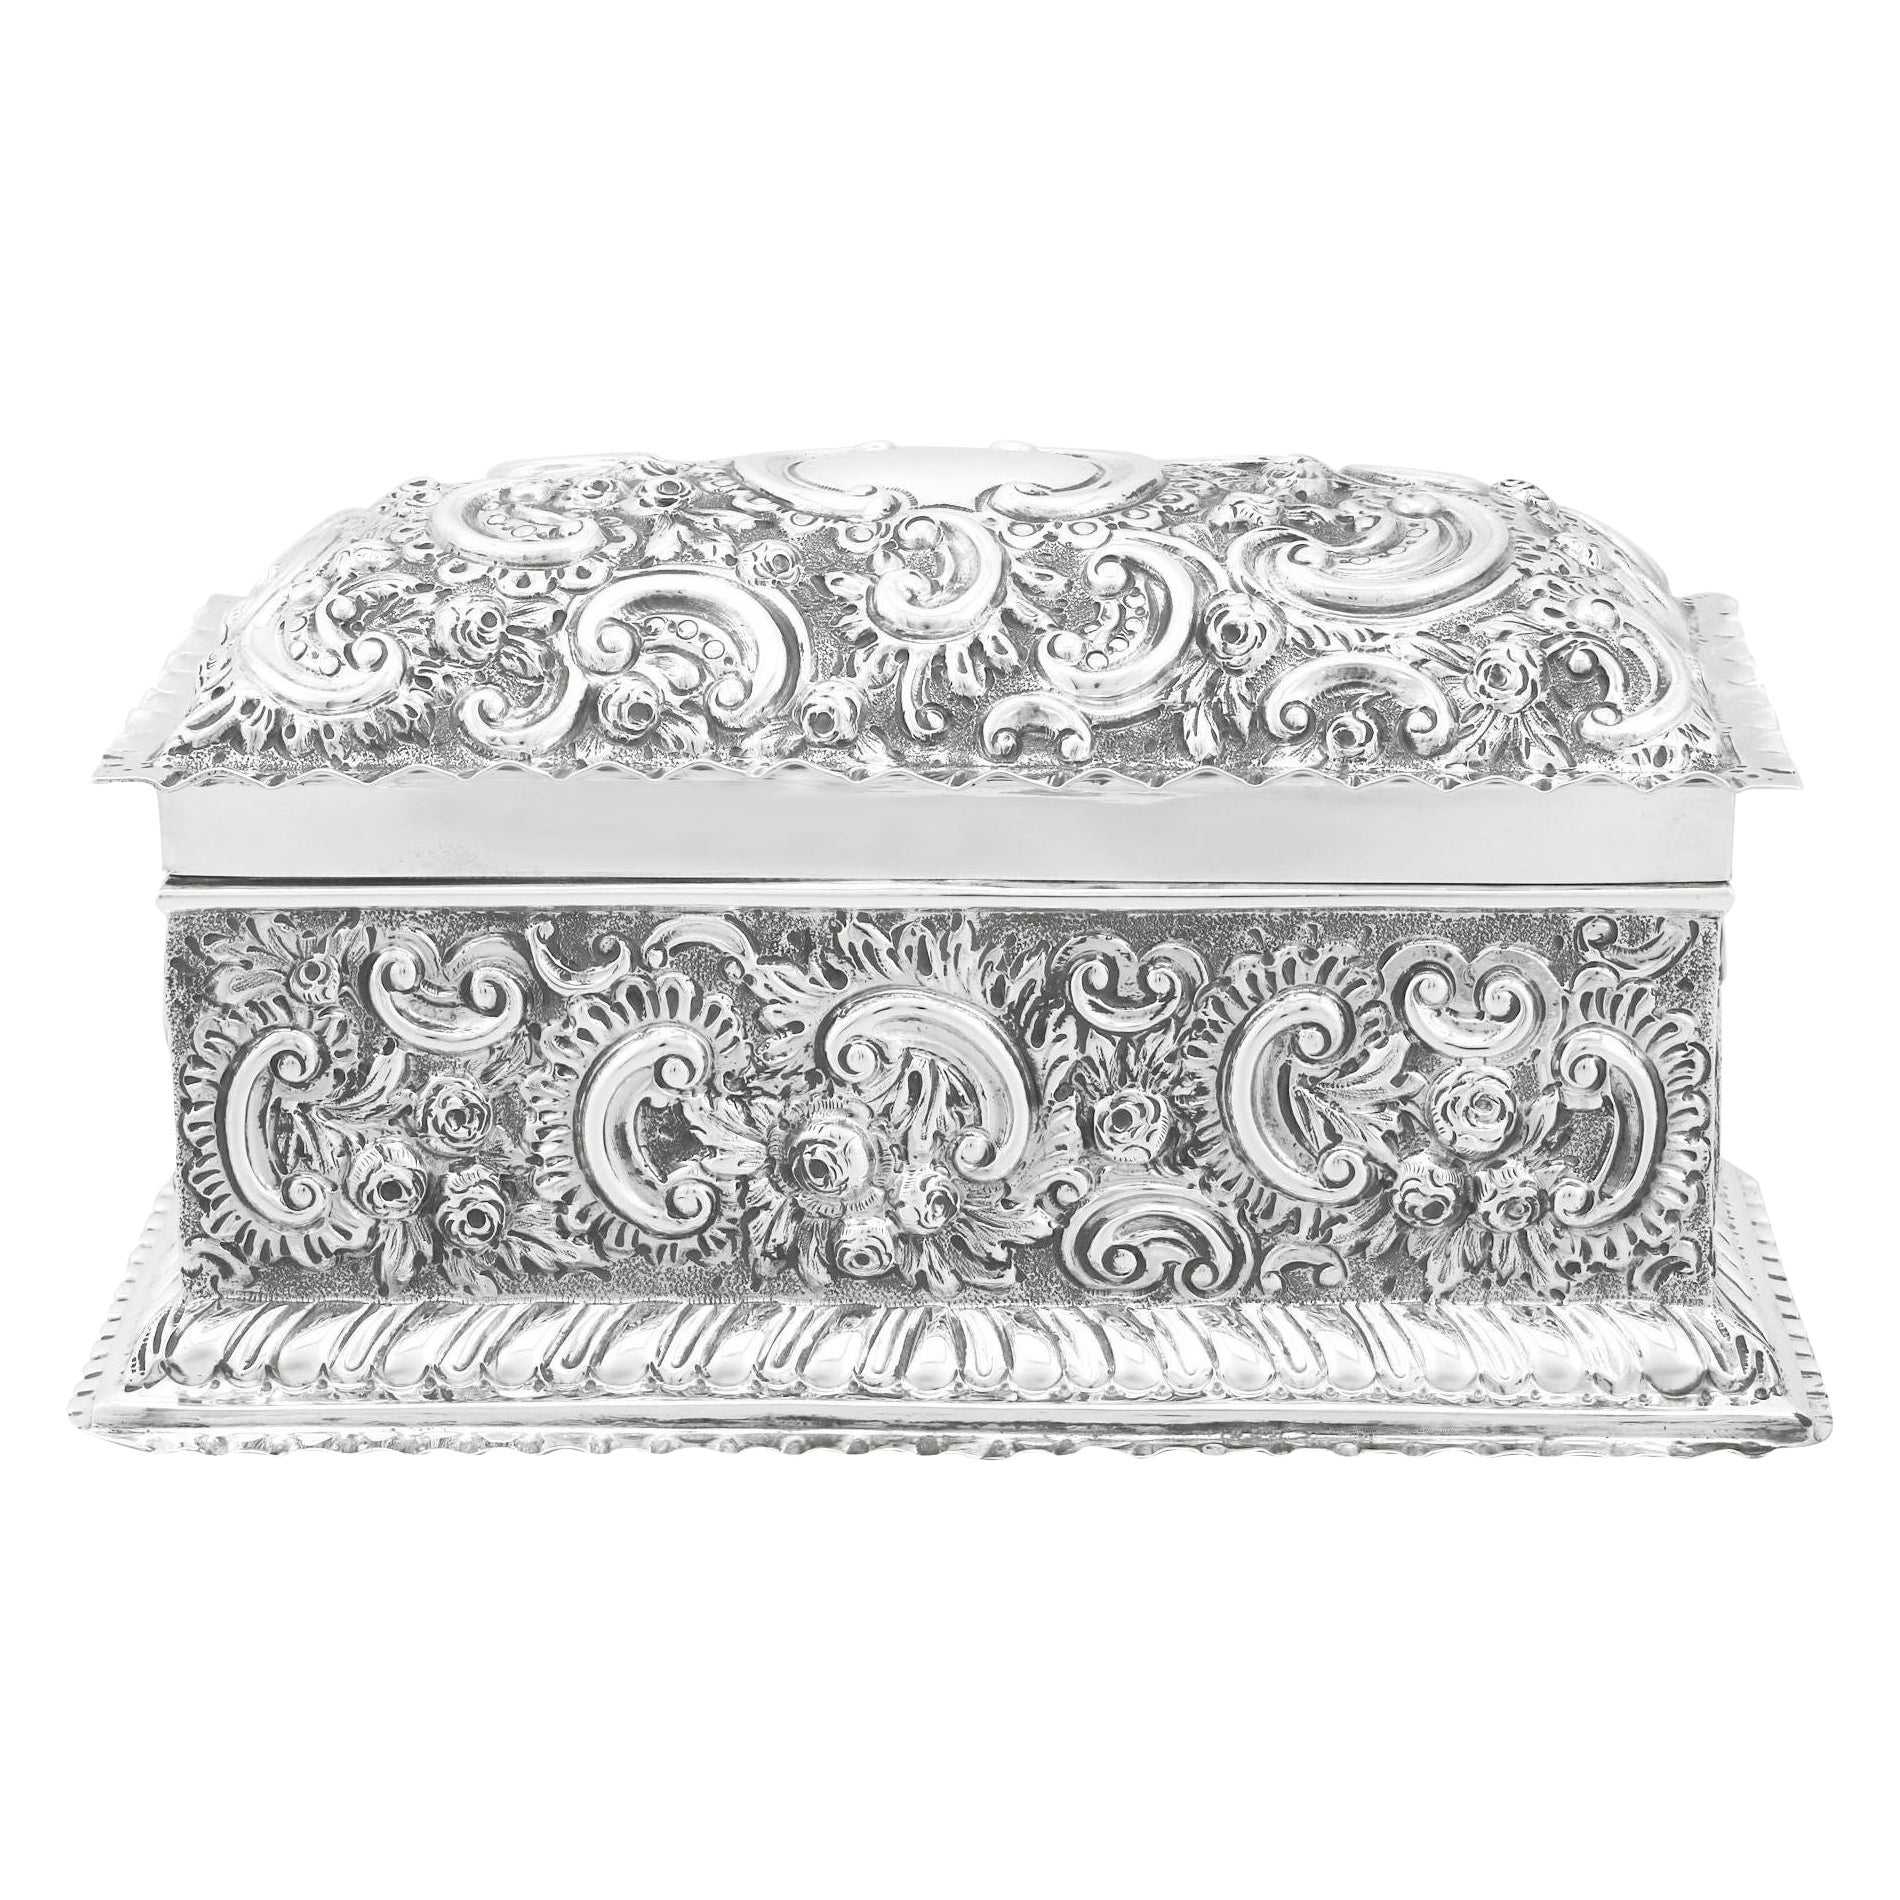 19th Century Victorian English Sterling Silver Jewelry Casket